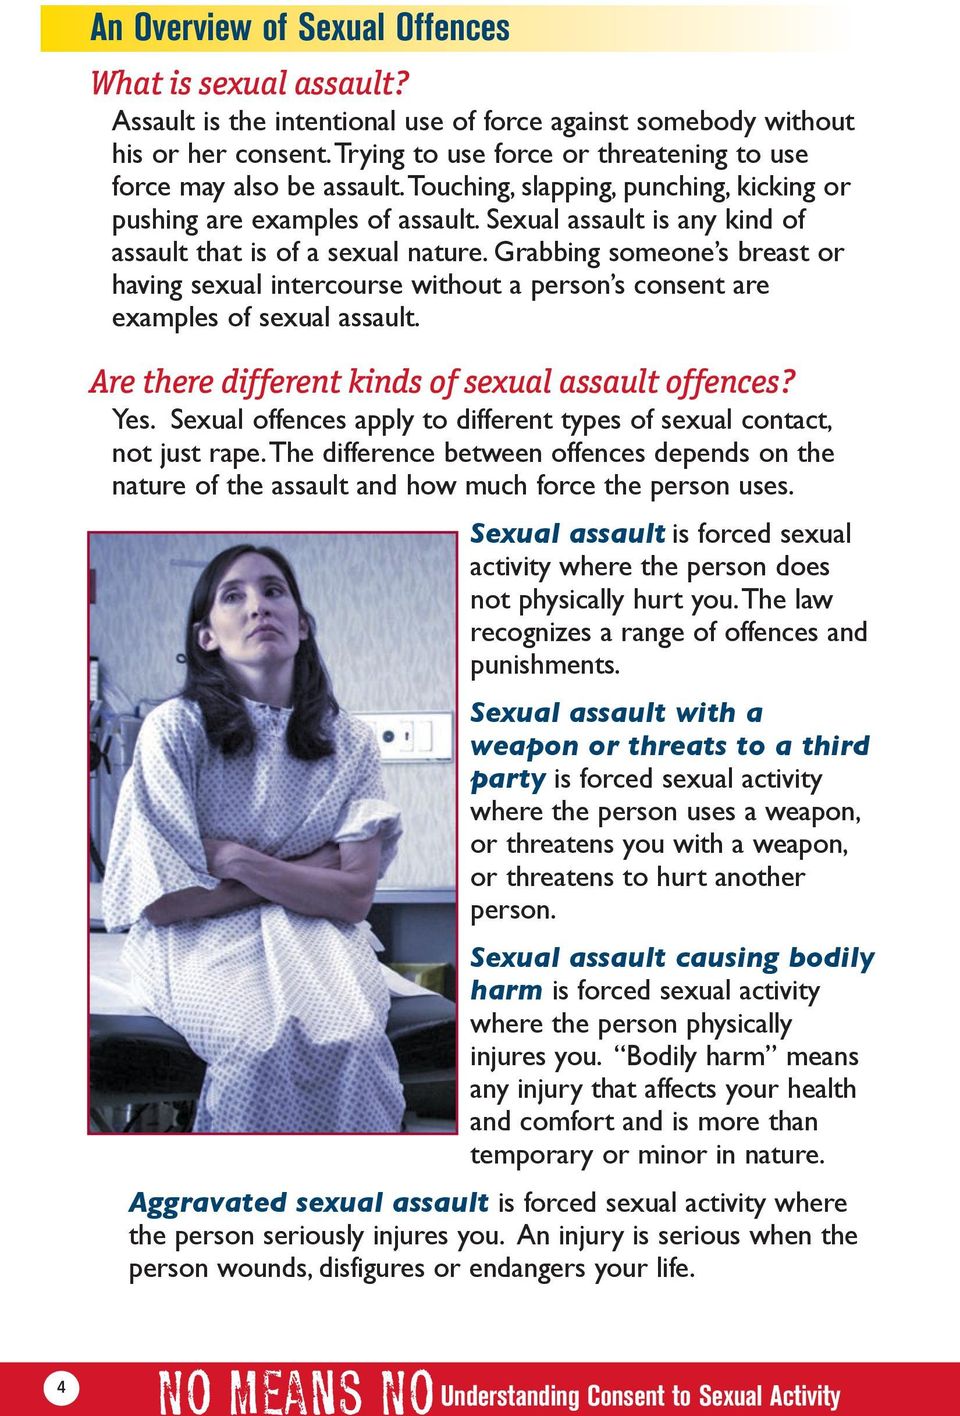 Sexual assault is any kind of assault that is of a sexual nature. Grabbing someone s breast or having sexual intercourse without a person s consent are examples of sexual assault.